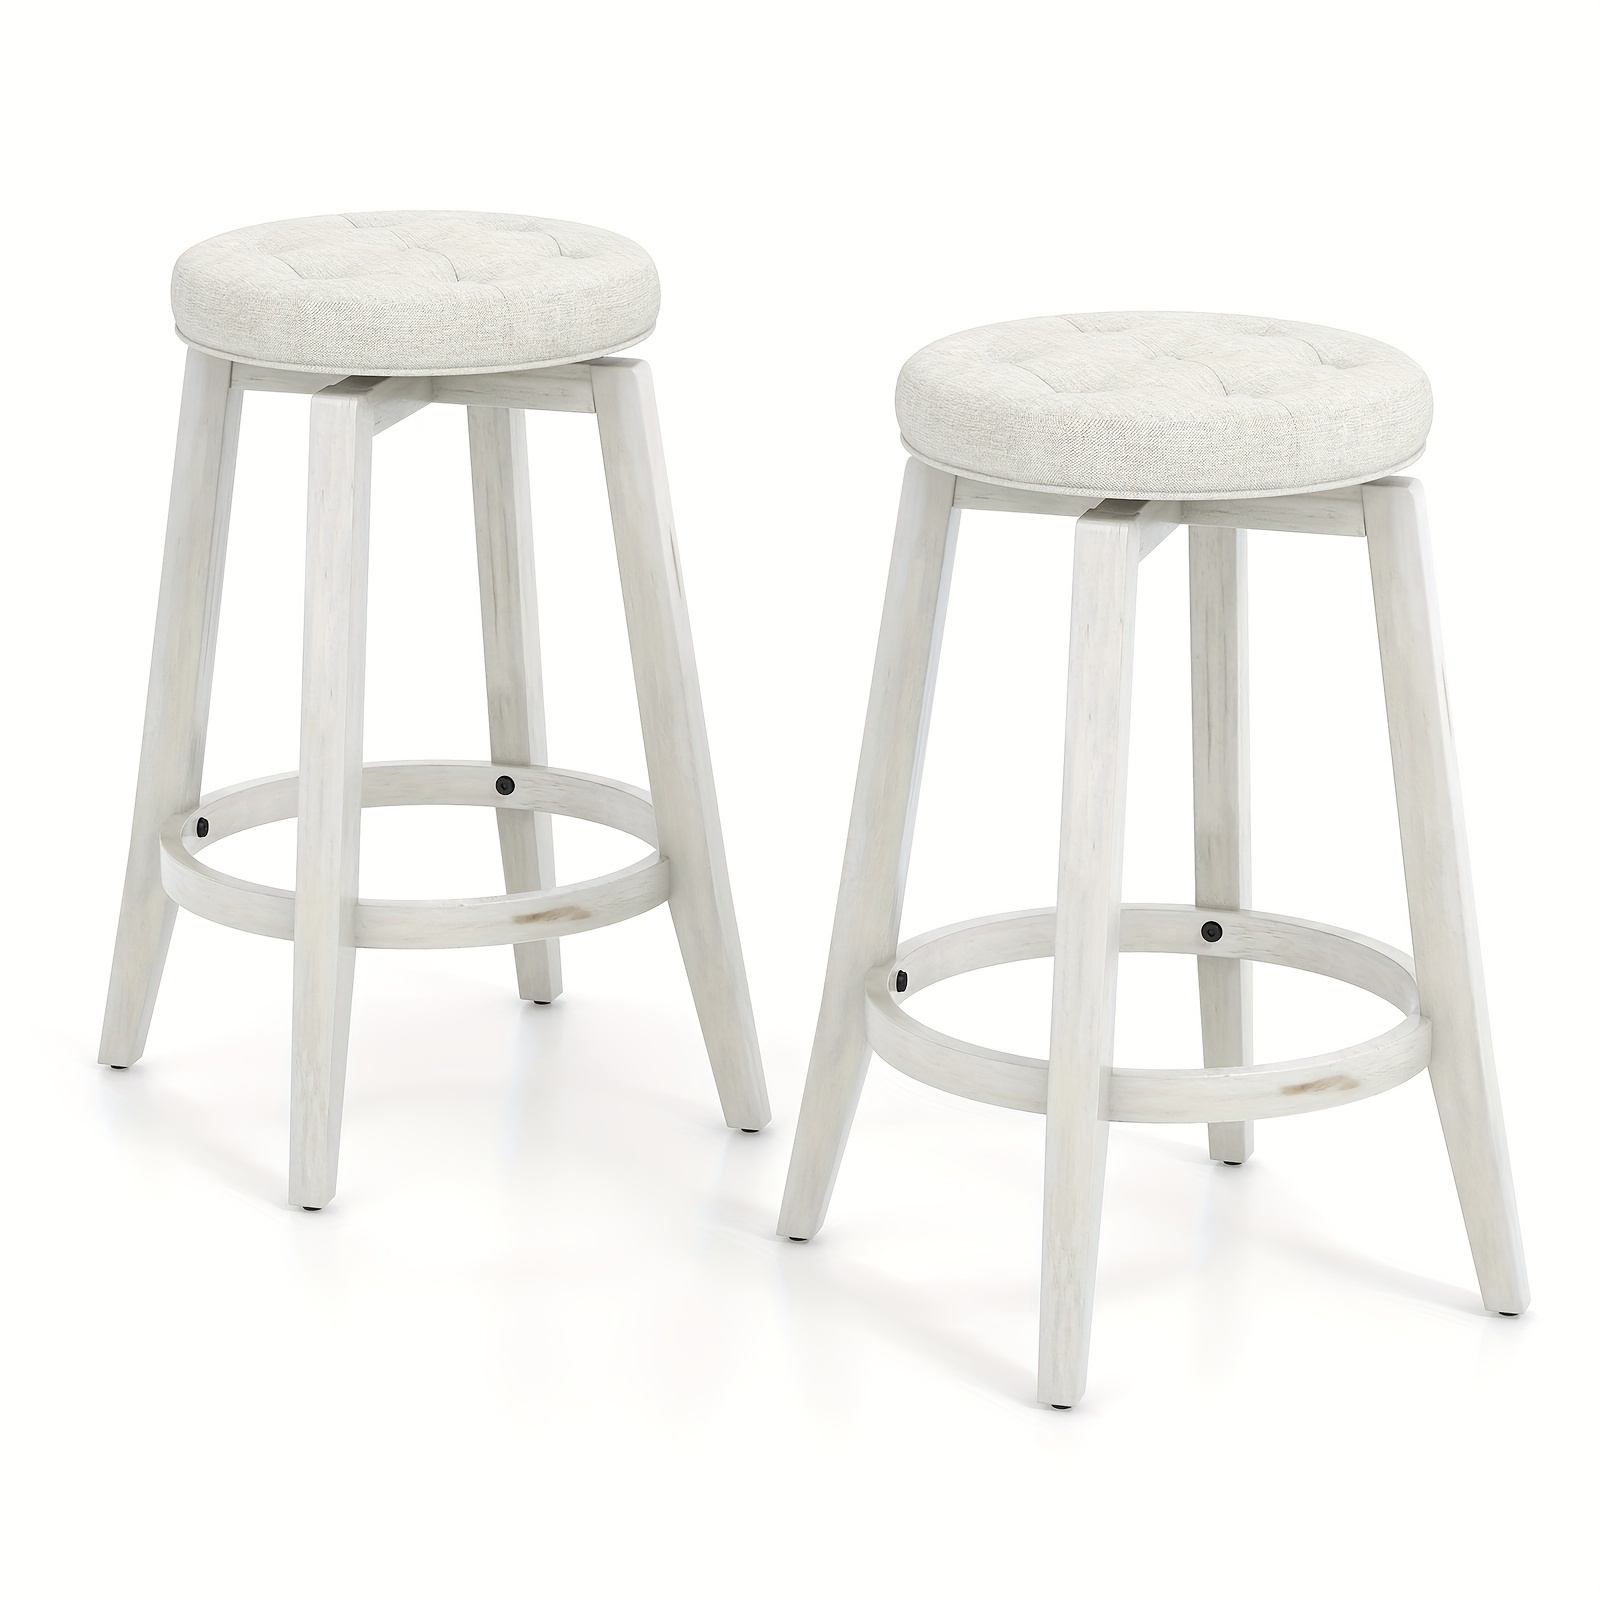 

Set Of 2 Swivel Bar Stools, 26" Counter Height Stools W/tufted Seat & Rubber Wood Frame, Round Backless Kitchen Stools With Footrest, Barstools For Kitchen Island/breakfast/pub, White